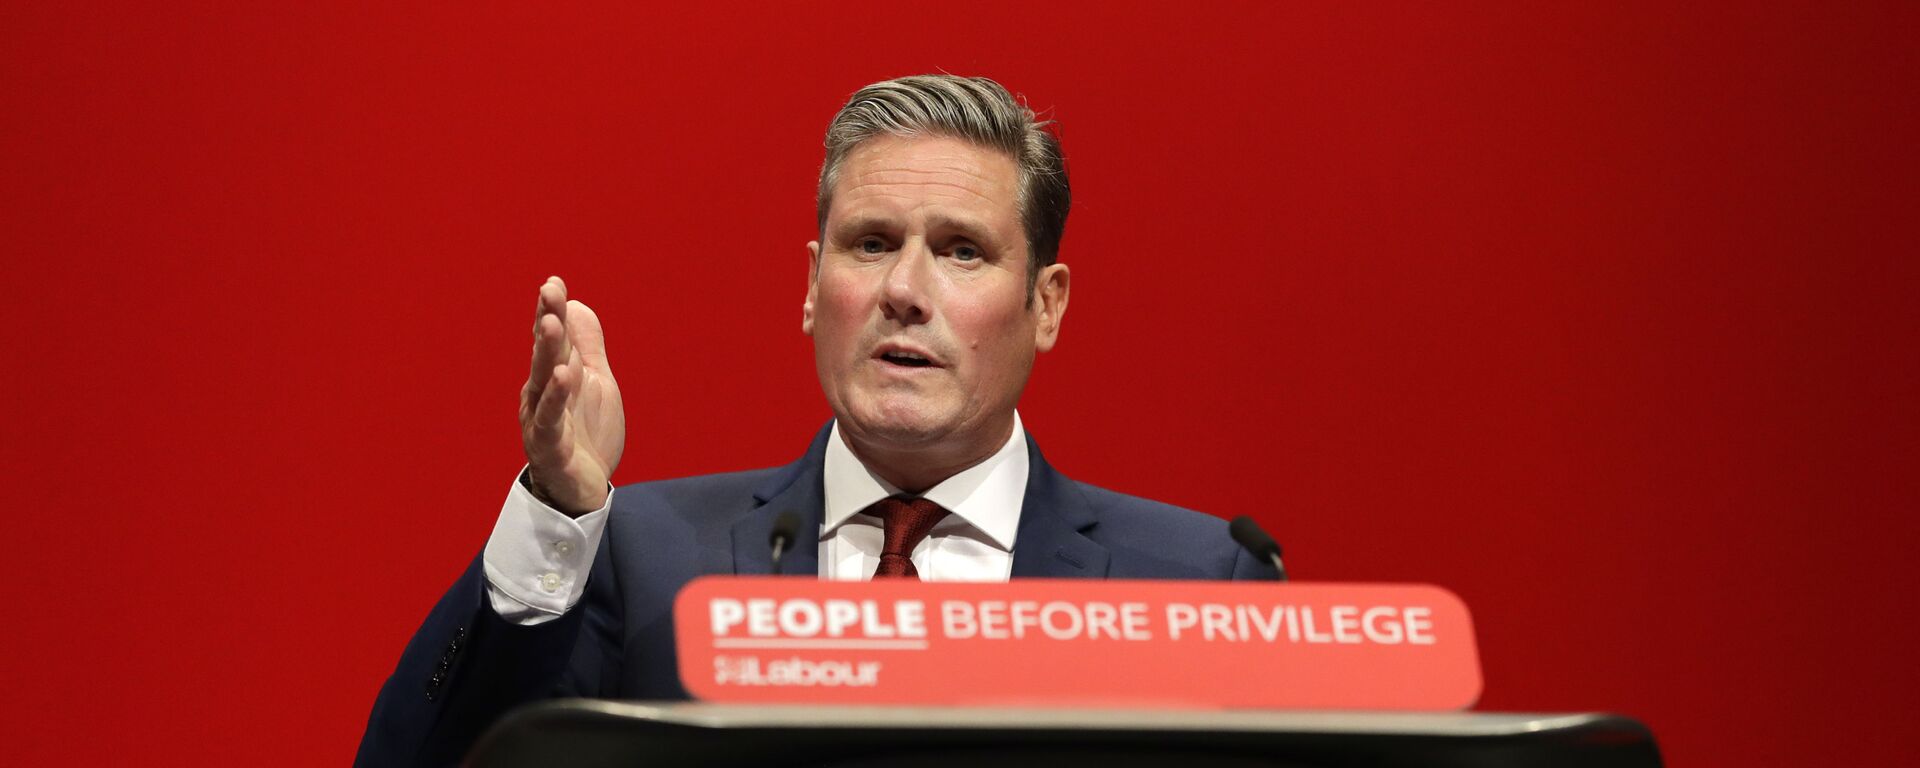 FILE - In this Monday, Sept. 23, 2019 file photo, Britain's Shadow Brexit Secretary Keir Starmer speaks on stage during the Labour Party Conference at the Brighton Centre in Brighton, England - Sputnik International, 1920, 10.05.2021